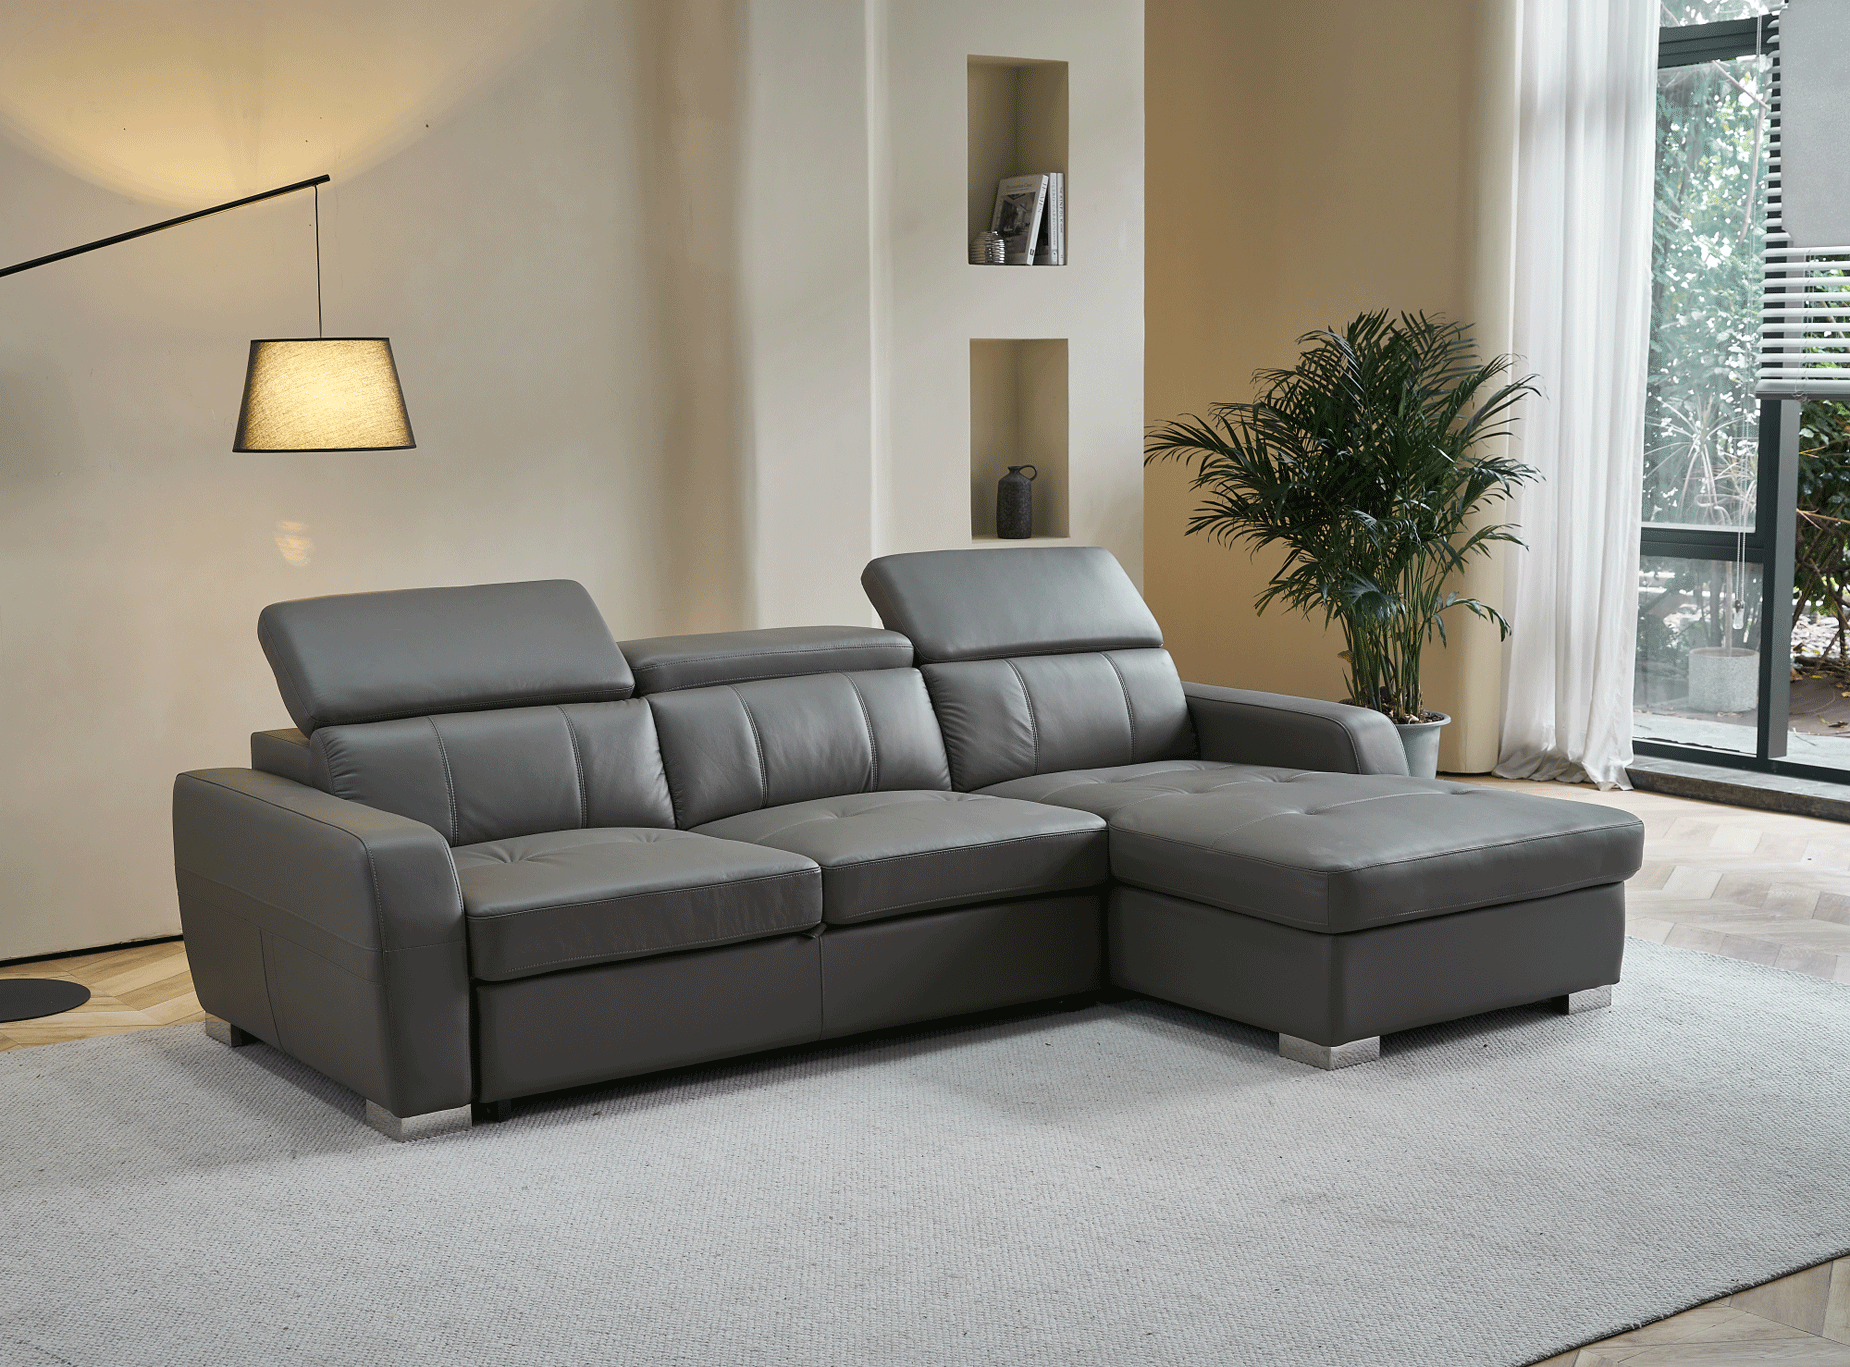 Living Room Furniture Reclining and Sliding Seats Sets 1822 GREY Sectional Right w/Bed